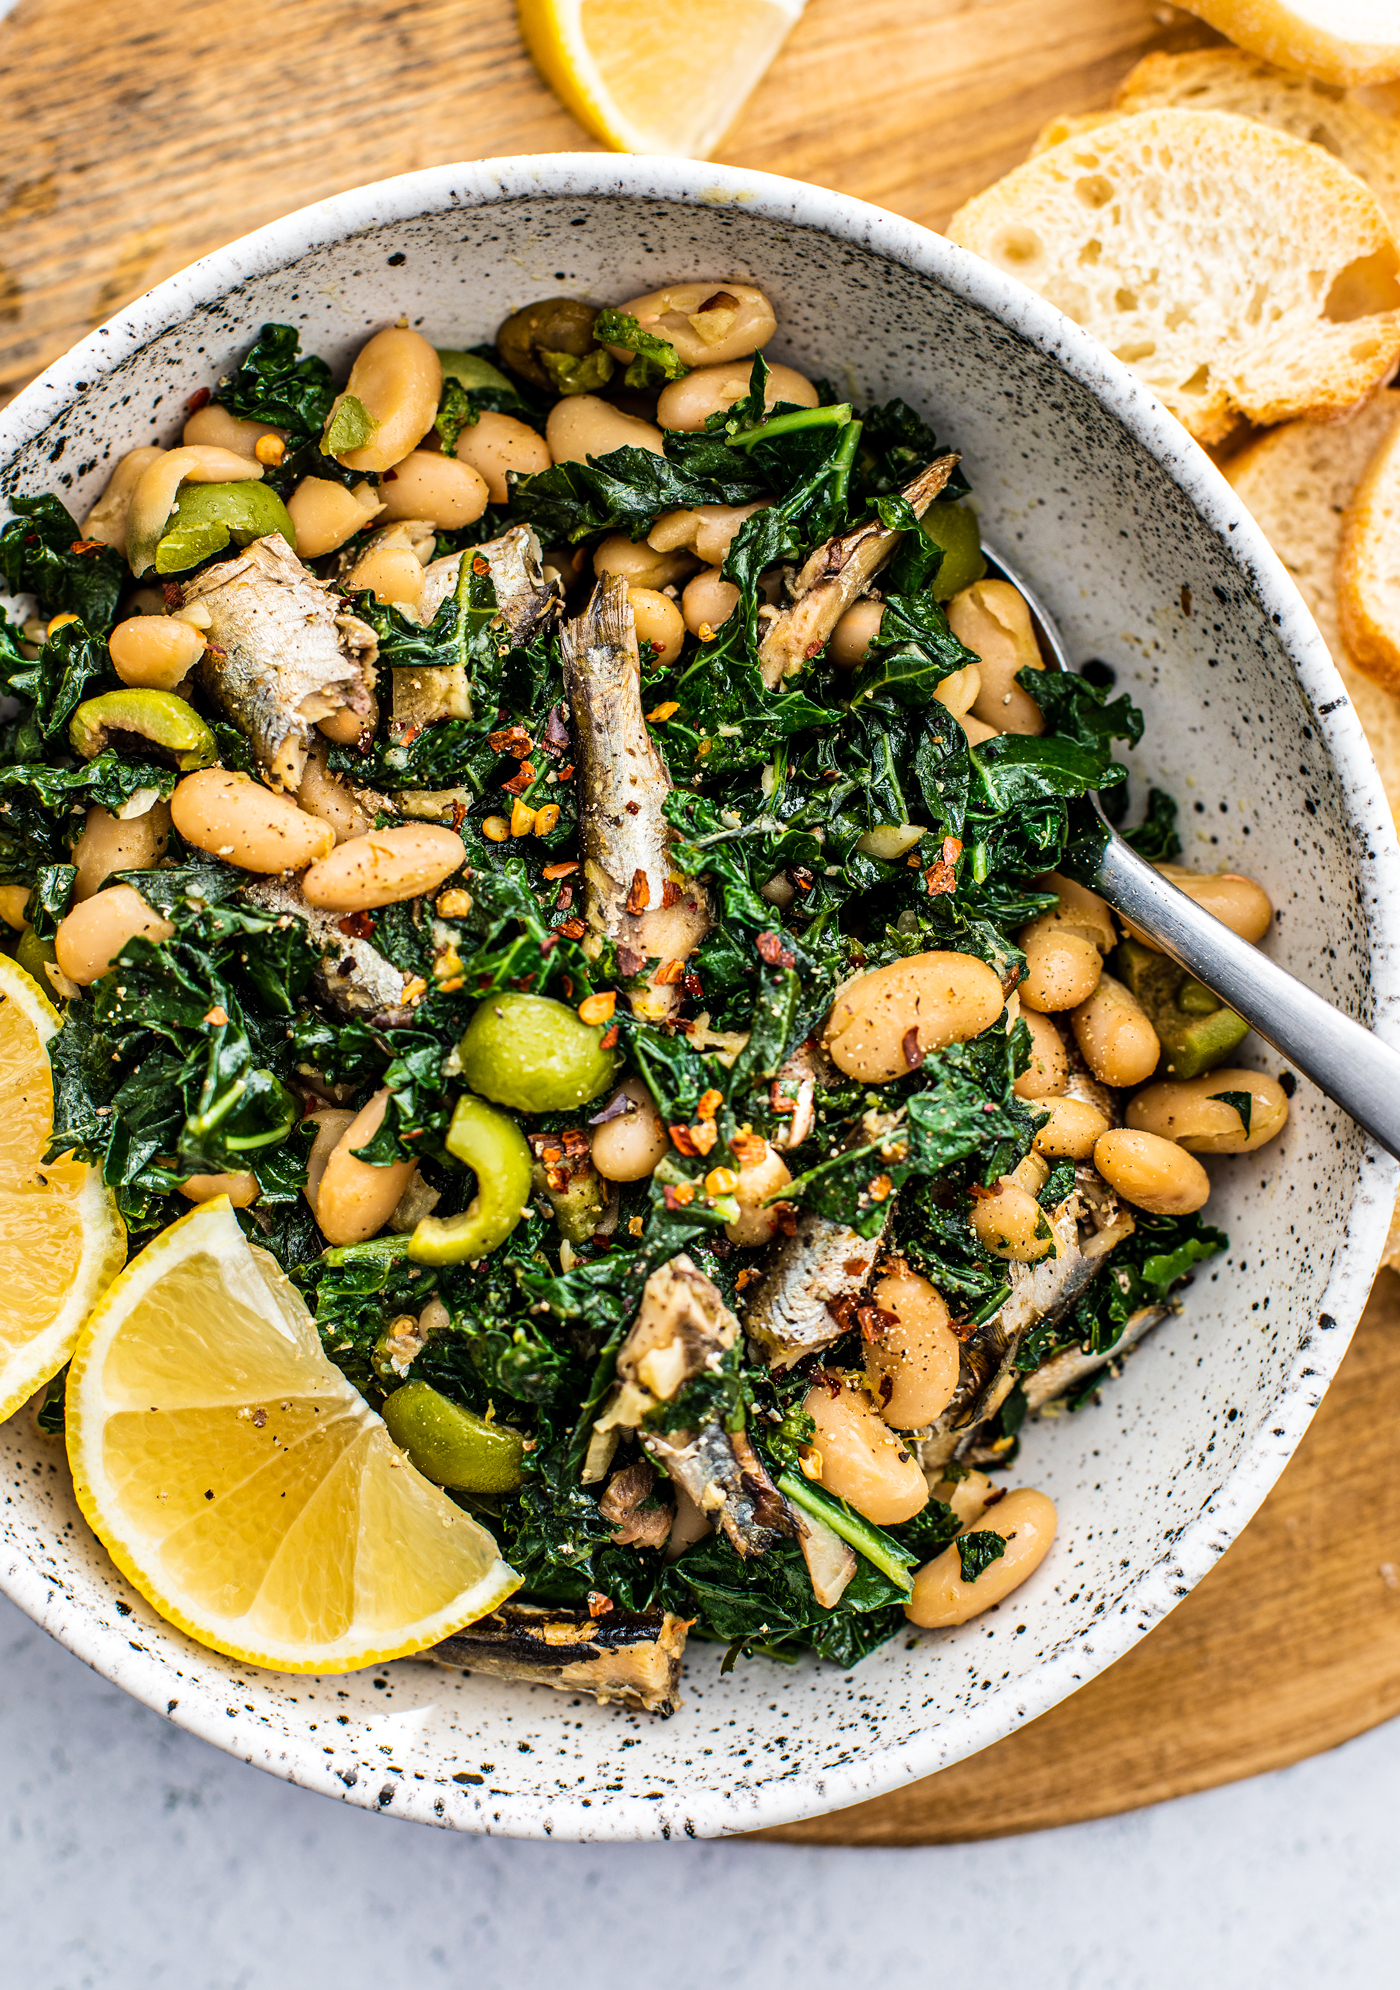 Serving bowl full of sauteed kale, white beans, sardines, and lemon wedges.